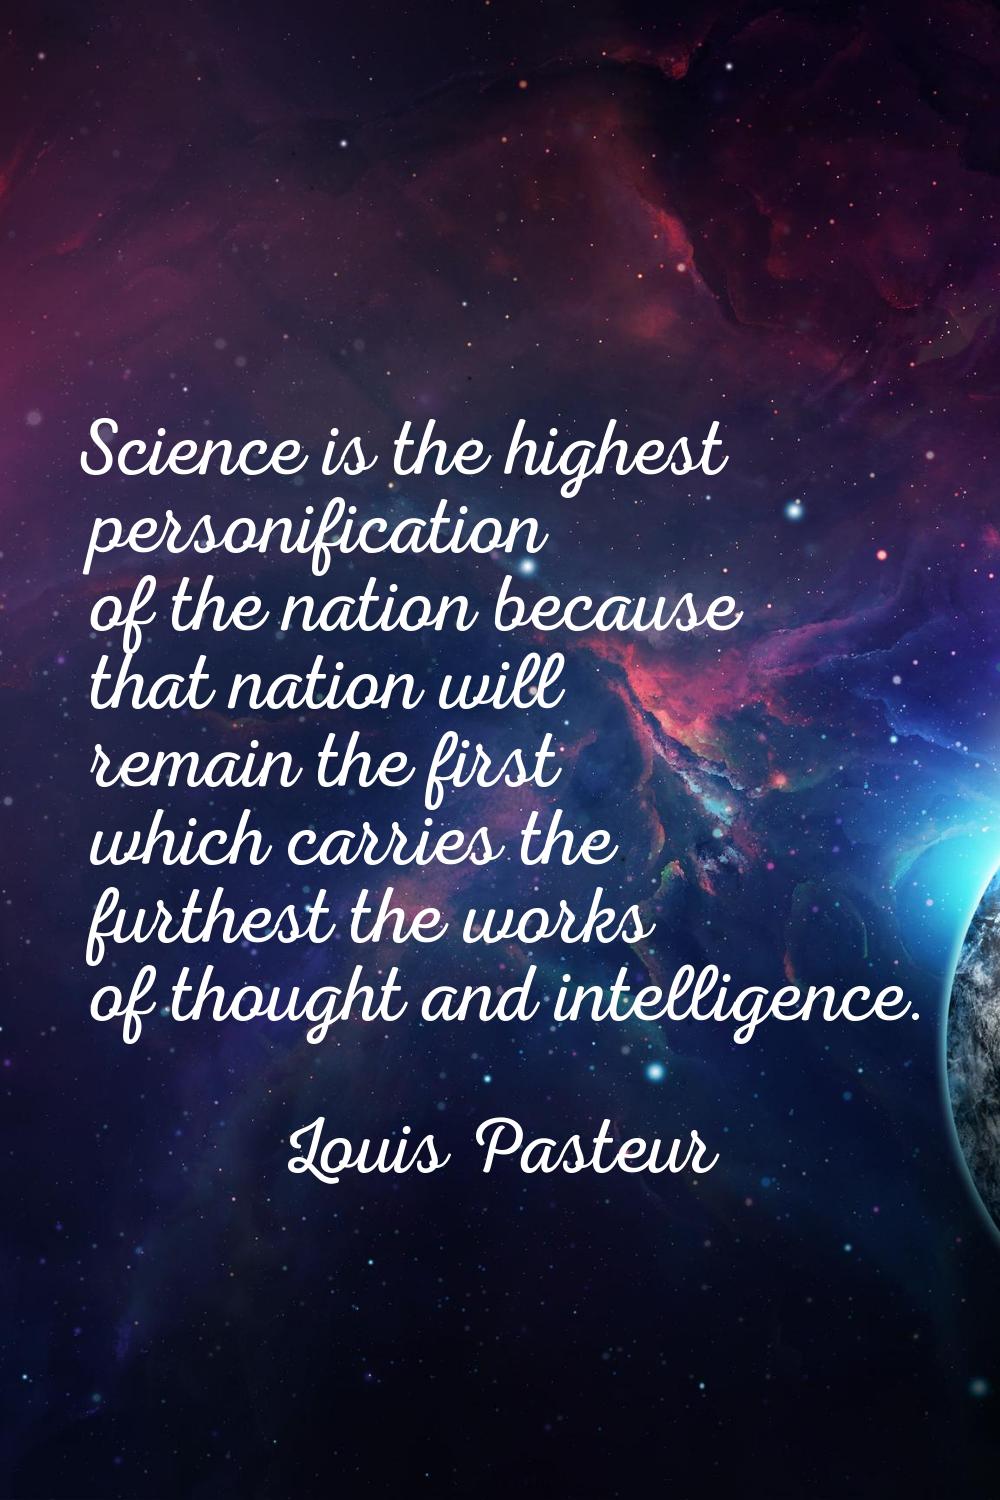 Science is the highest personification of the nation because that nation will remain the first whic